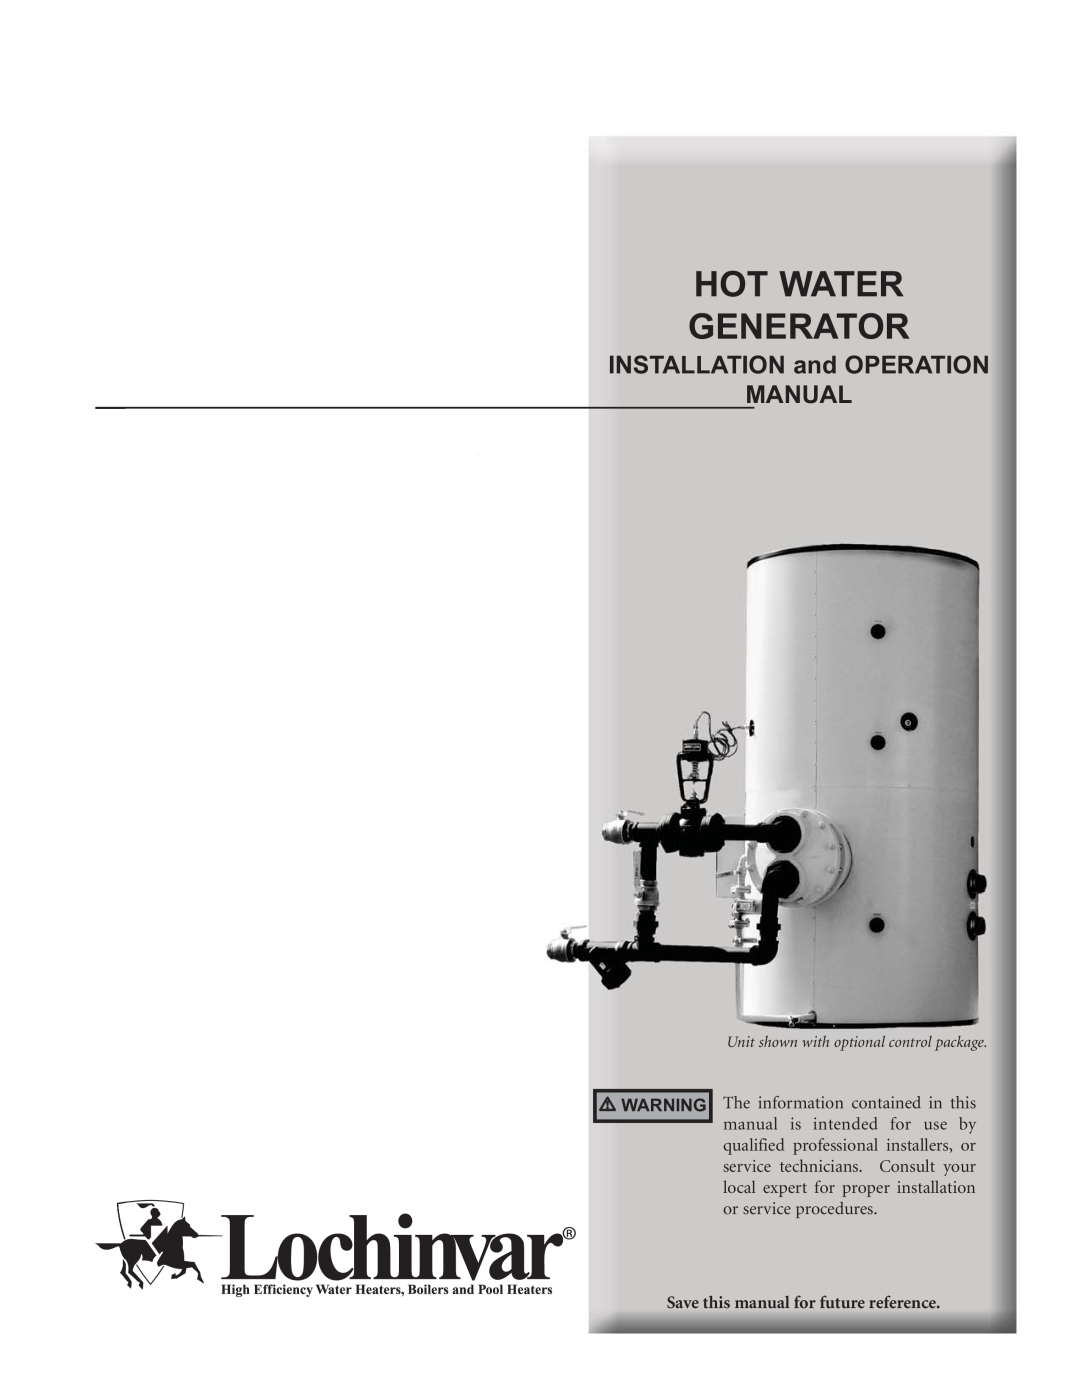 Lochinvar Hot Water Generator operation manual Unit shown with optional control package 